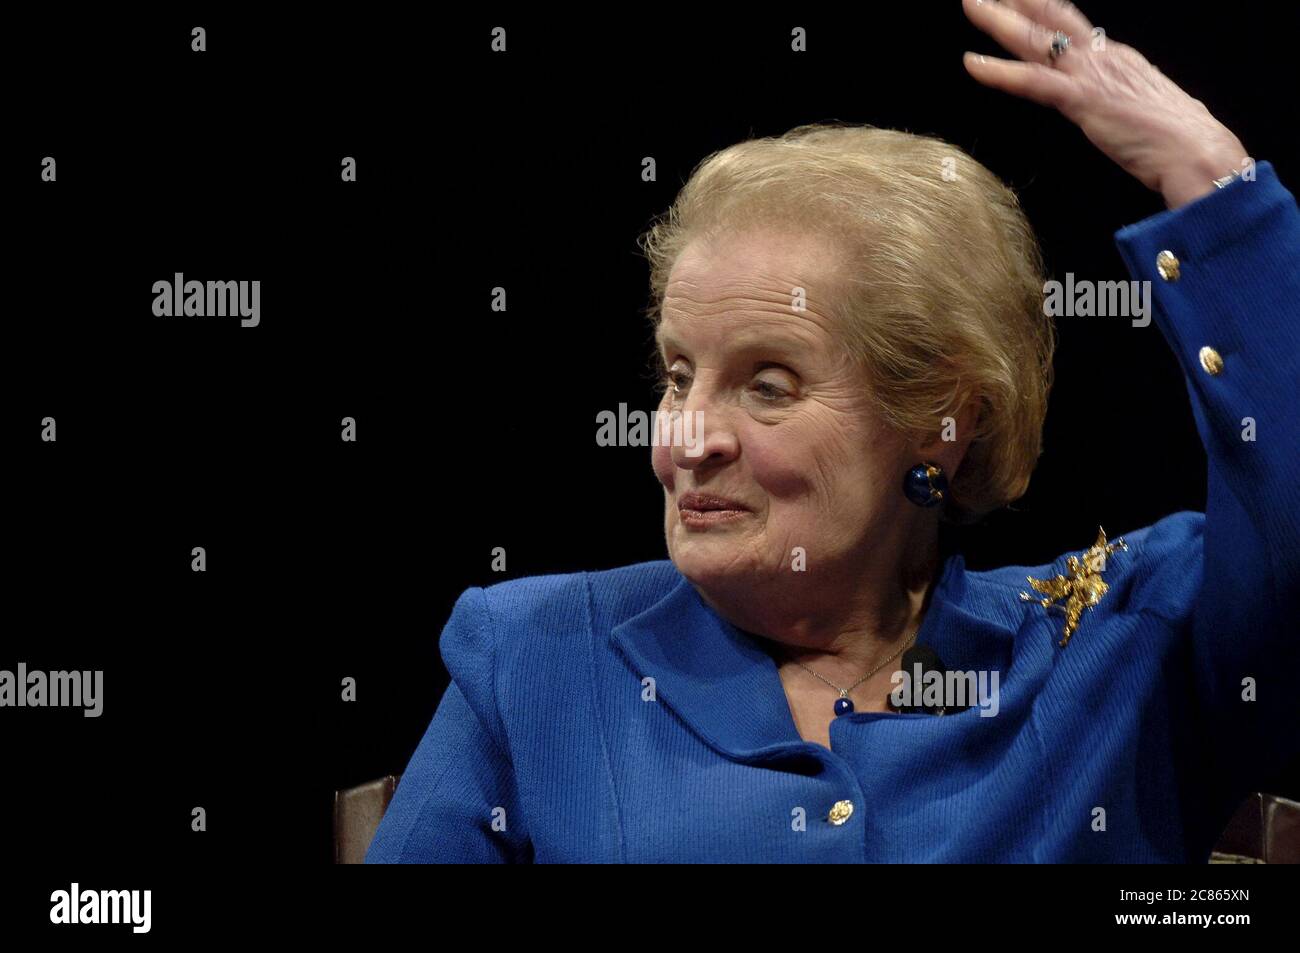 Austin, Texas USA, November 17, 2005: Former U.S. Secretary of State Madeline Albright discusses what she says is the failed foreign policy of the Bush administration during an appearance at St. Edward's University. Albright served eight years under President Clinton. ©Bob Daemmrich Stock Photo